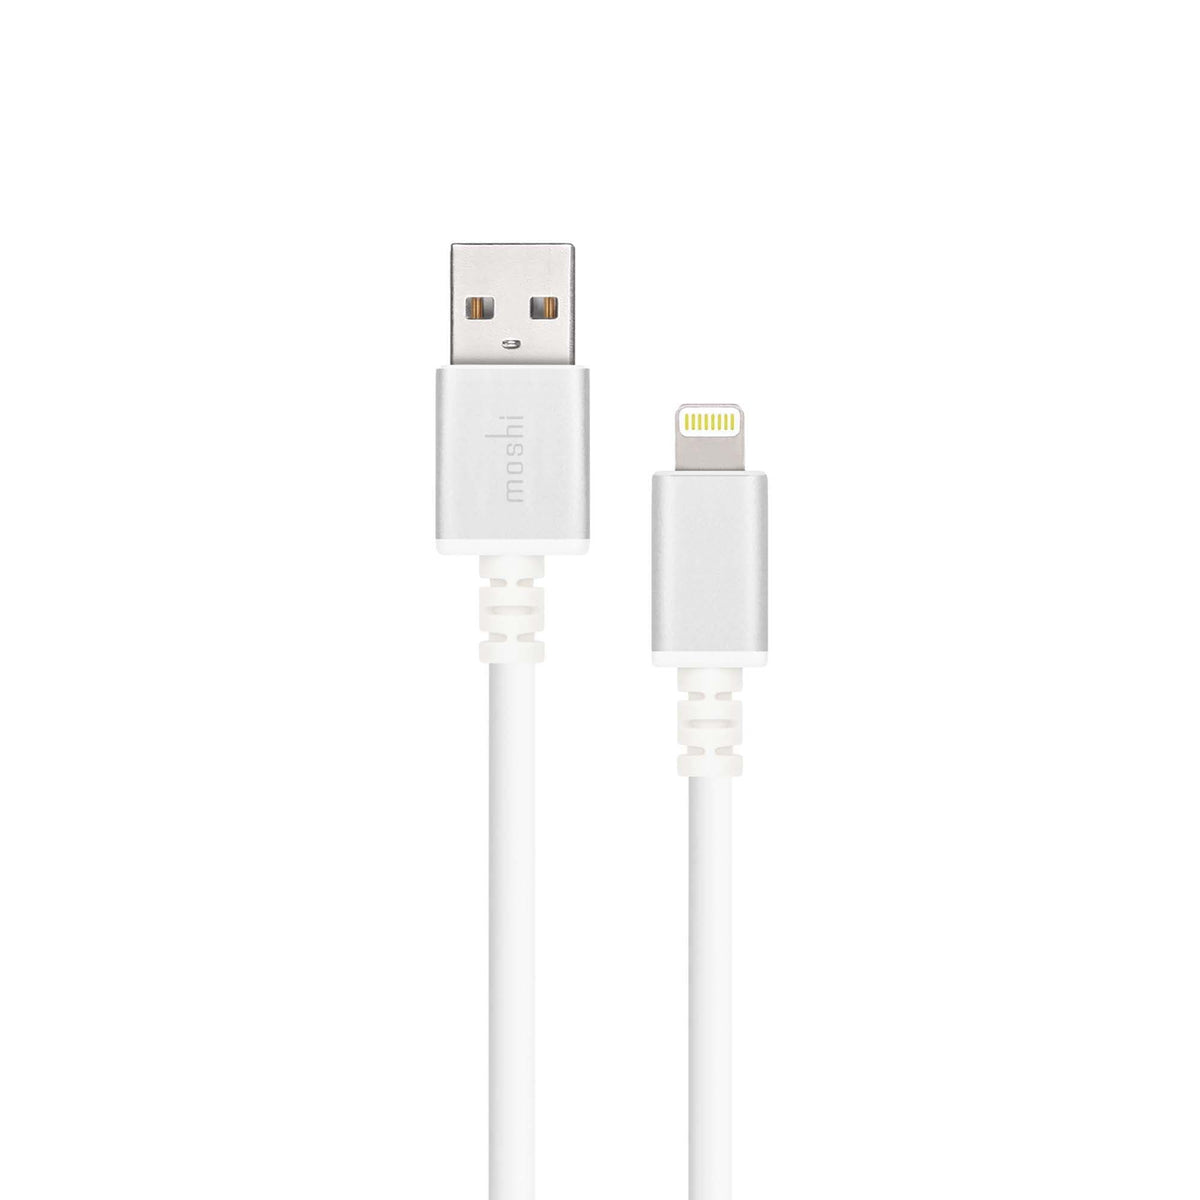 Moshi Usb Cable With Lightning Connector 3M White